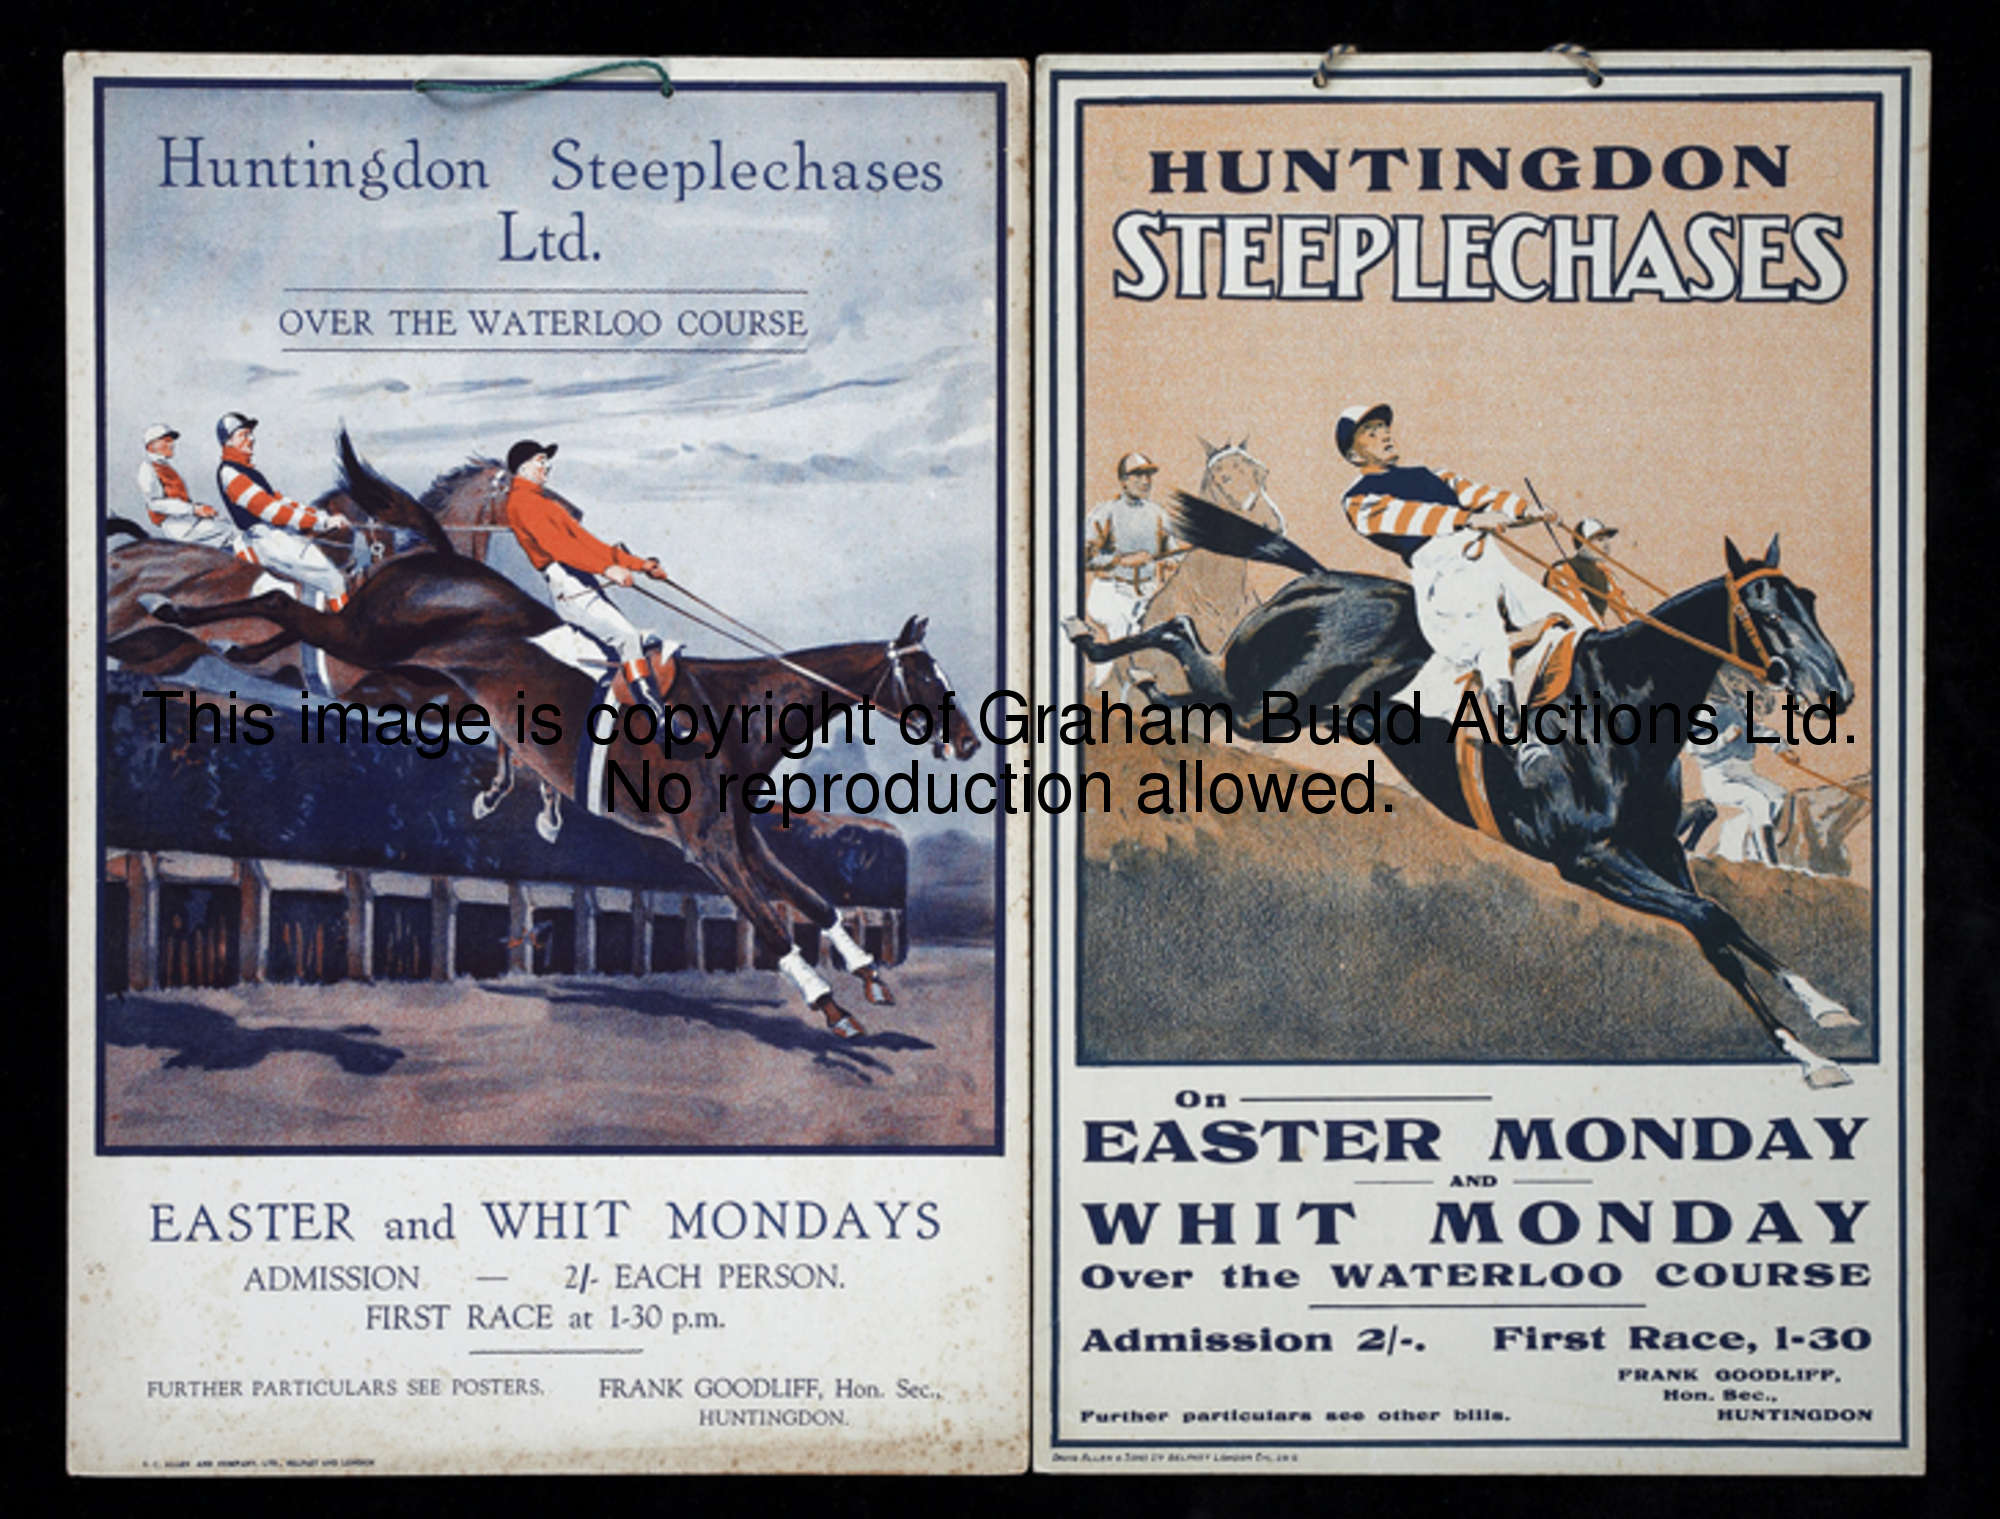 Two vintage posters for Huntingdon Steeplechases on Easter Monday and Whit Monday, colour lithograph...